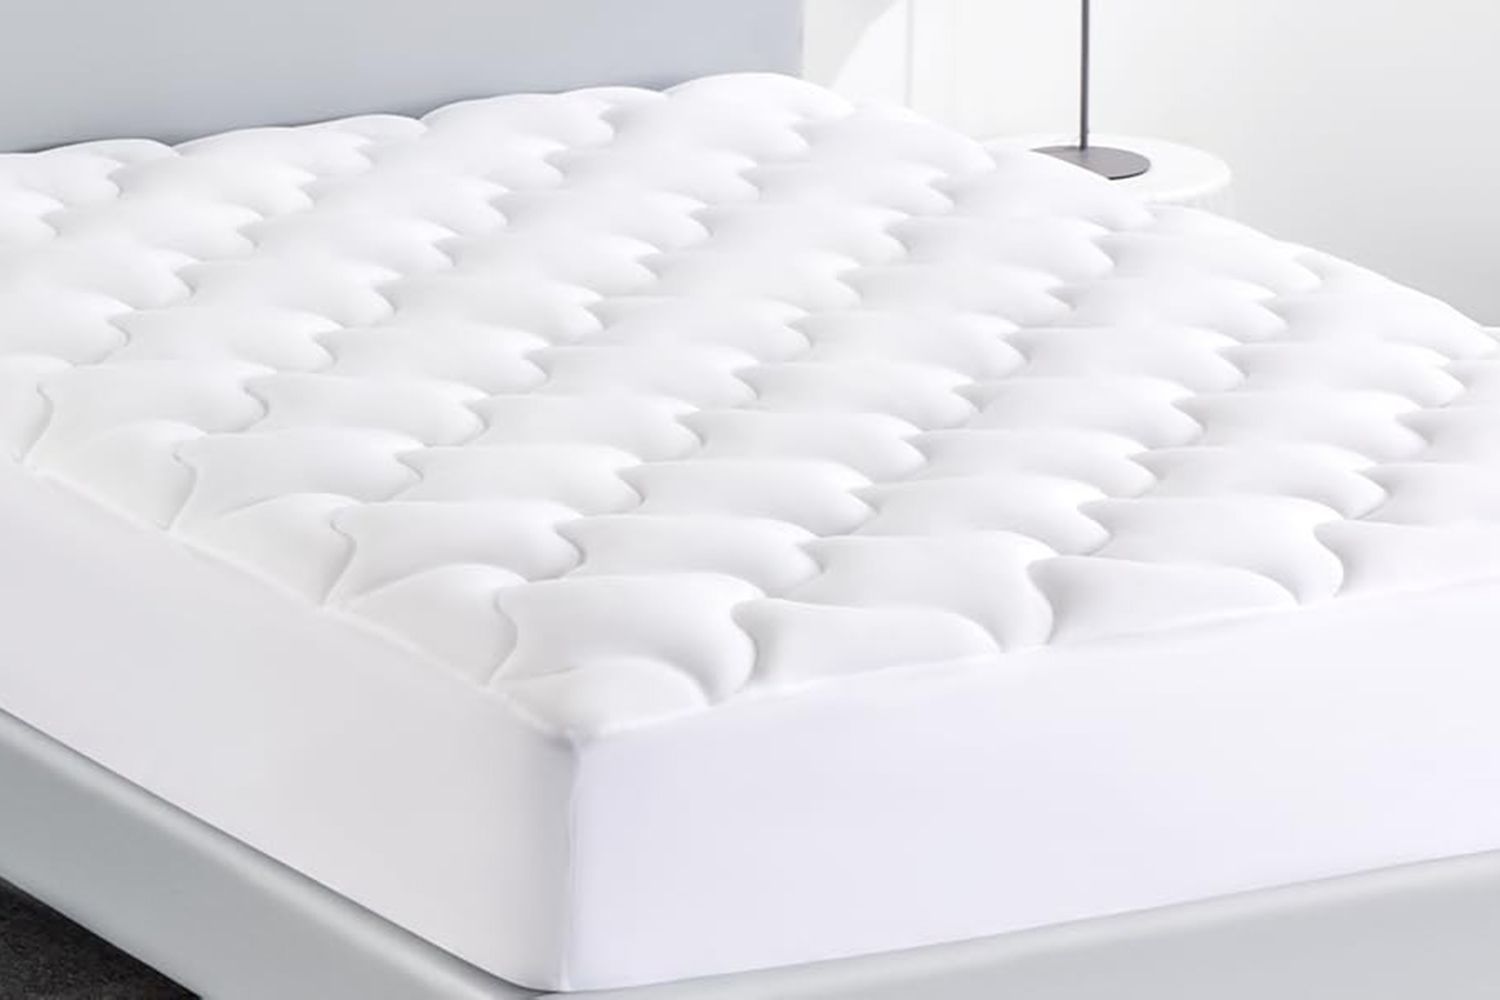 SLEEP ZONE Extra Long Twin Mattress Pad Dorm Bedding Cooling Topper for College, Quilted Fitted Cover Washable, Soft Fluffy Down Alternative, Deep Pocket 8~21 inch (White, XL)